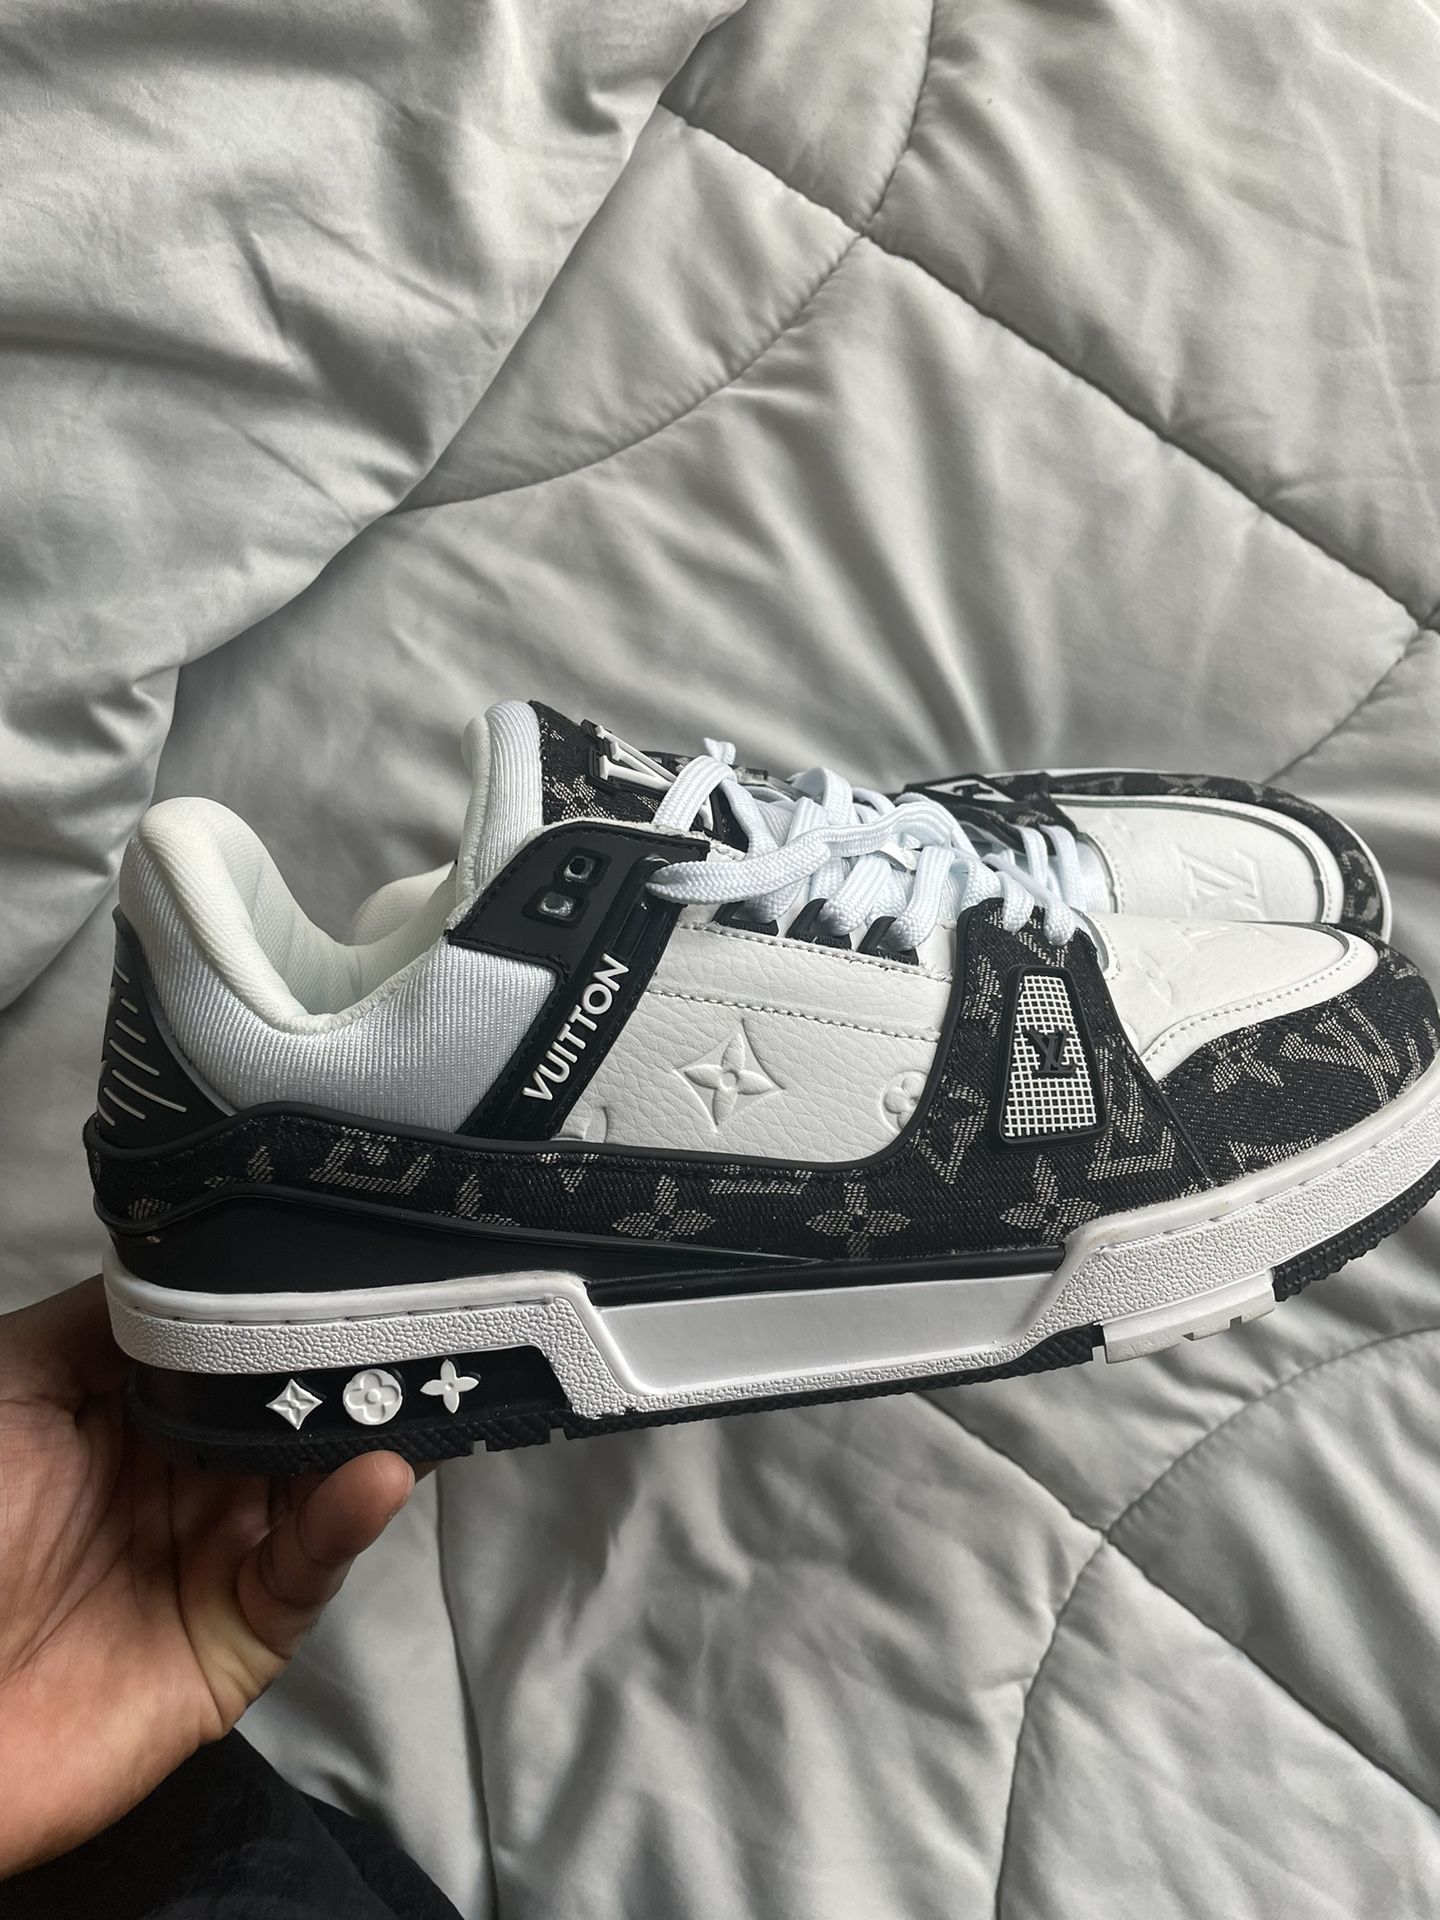 Louis Vuitton Trainer 54 for Sale in Houston, TX - OfferUp